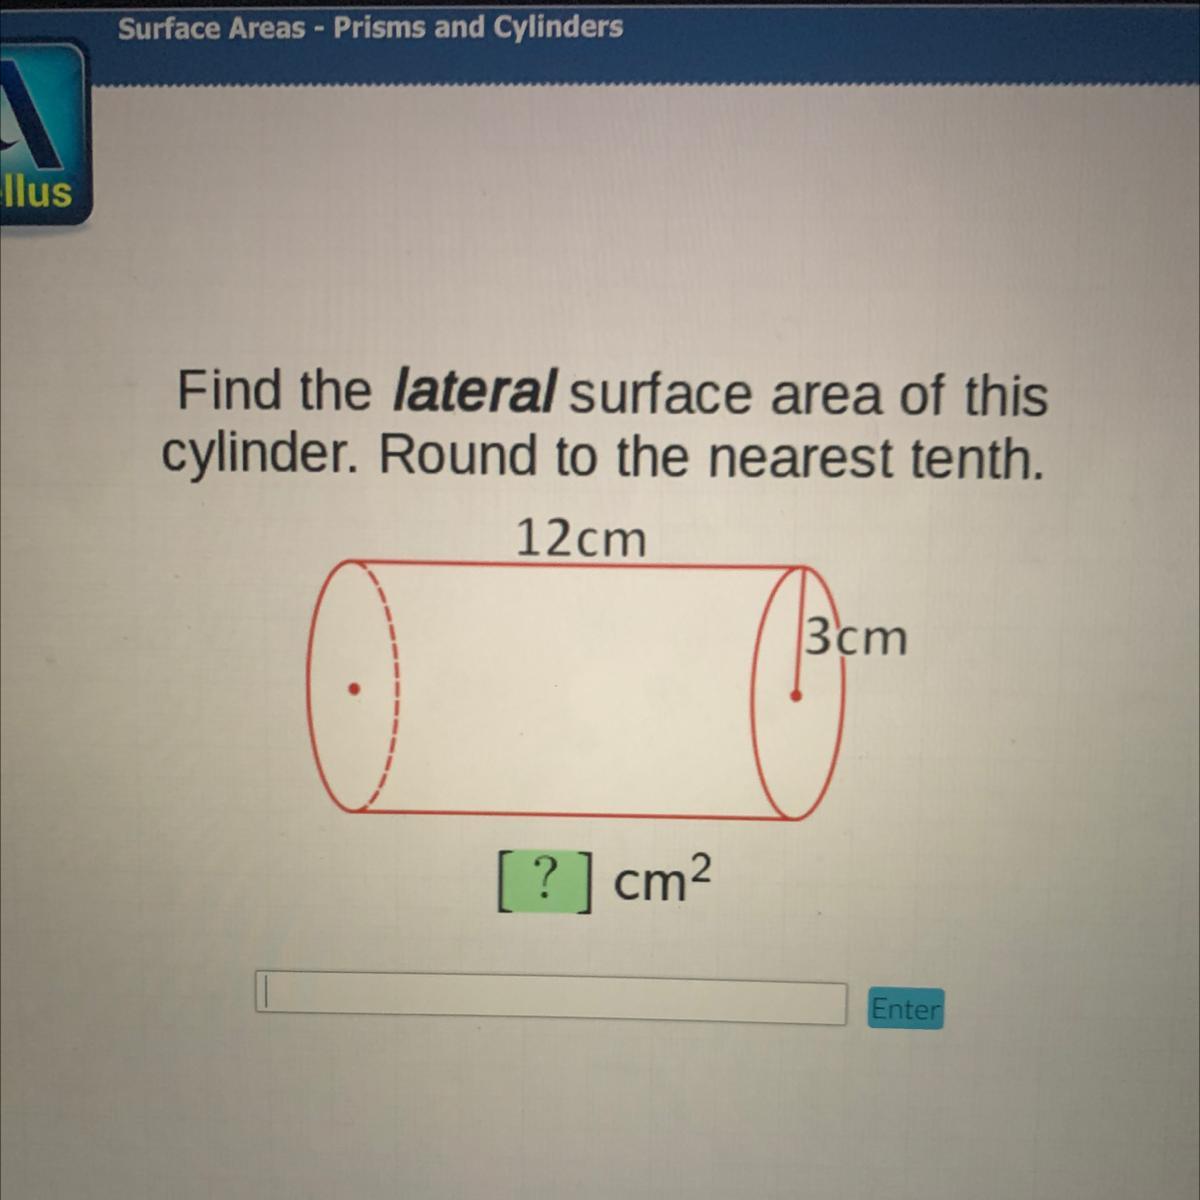 Find The Lateral Surface Area Of Thiscylinder. Round To The Nearest Tenth.12cm3 Cm?] Cm2